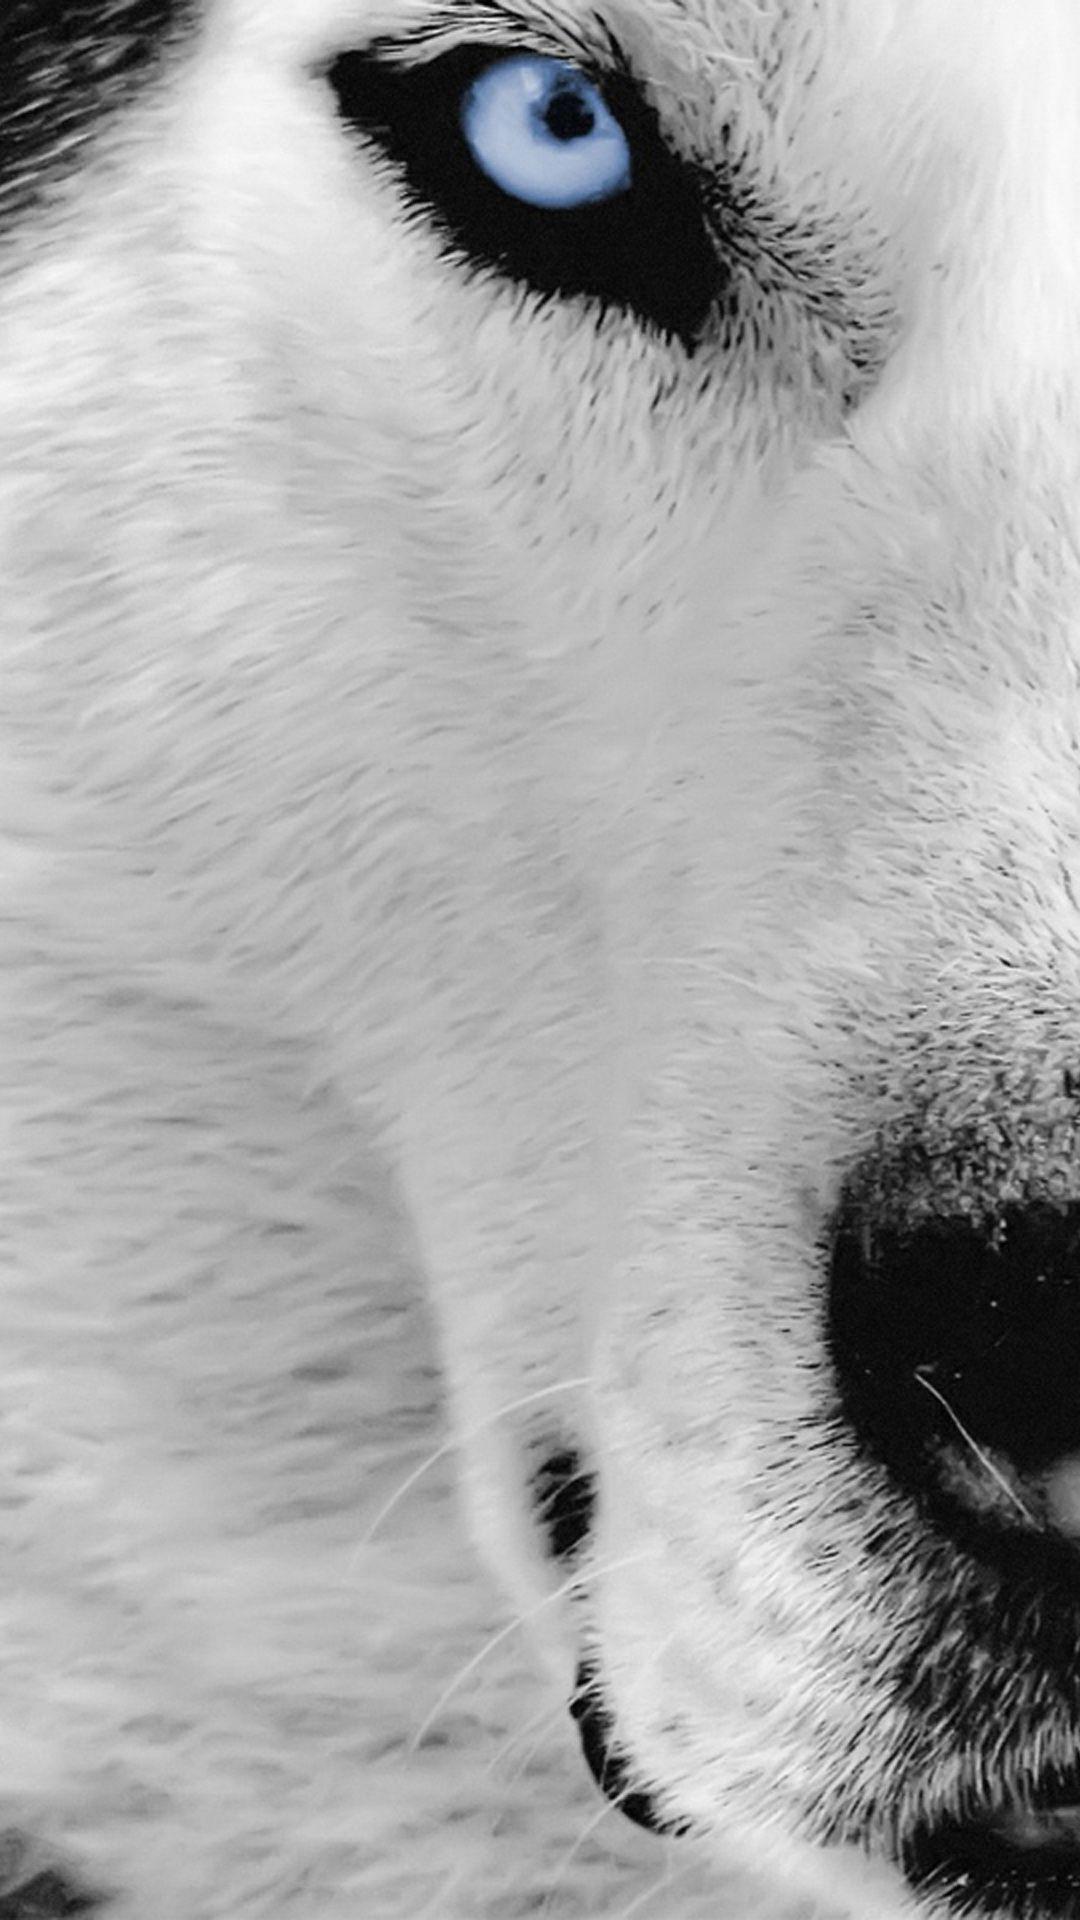 Wolf iPhone Wallpapers - Top Free Wolf iPhone Backgrounds - WallpaperAccess